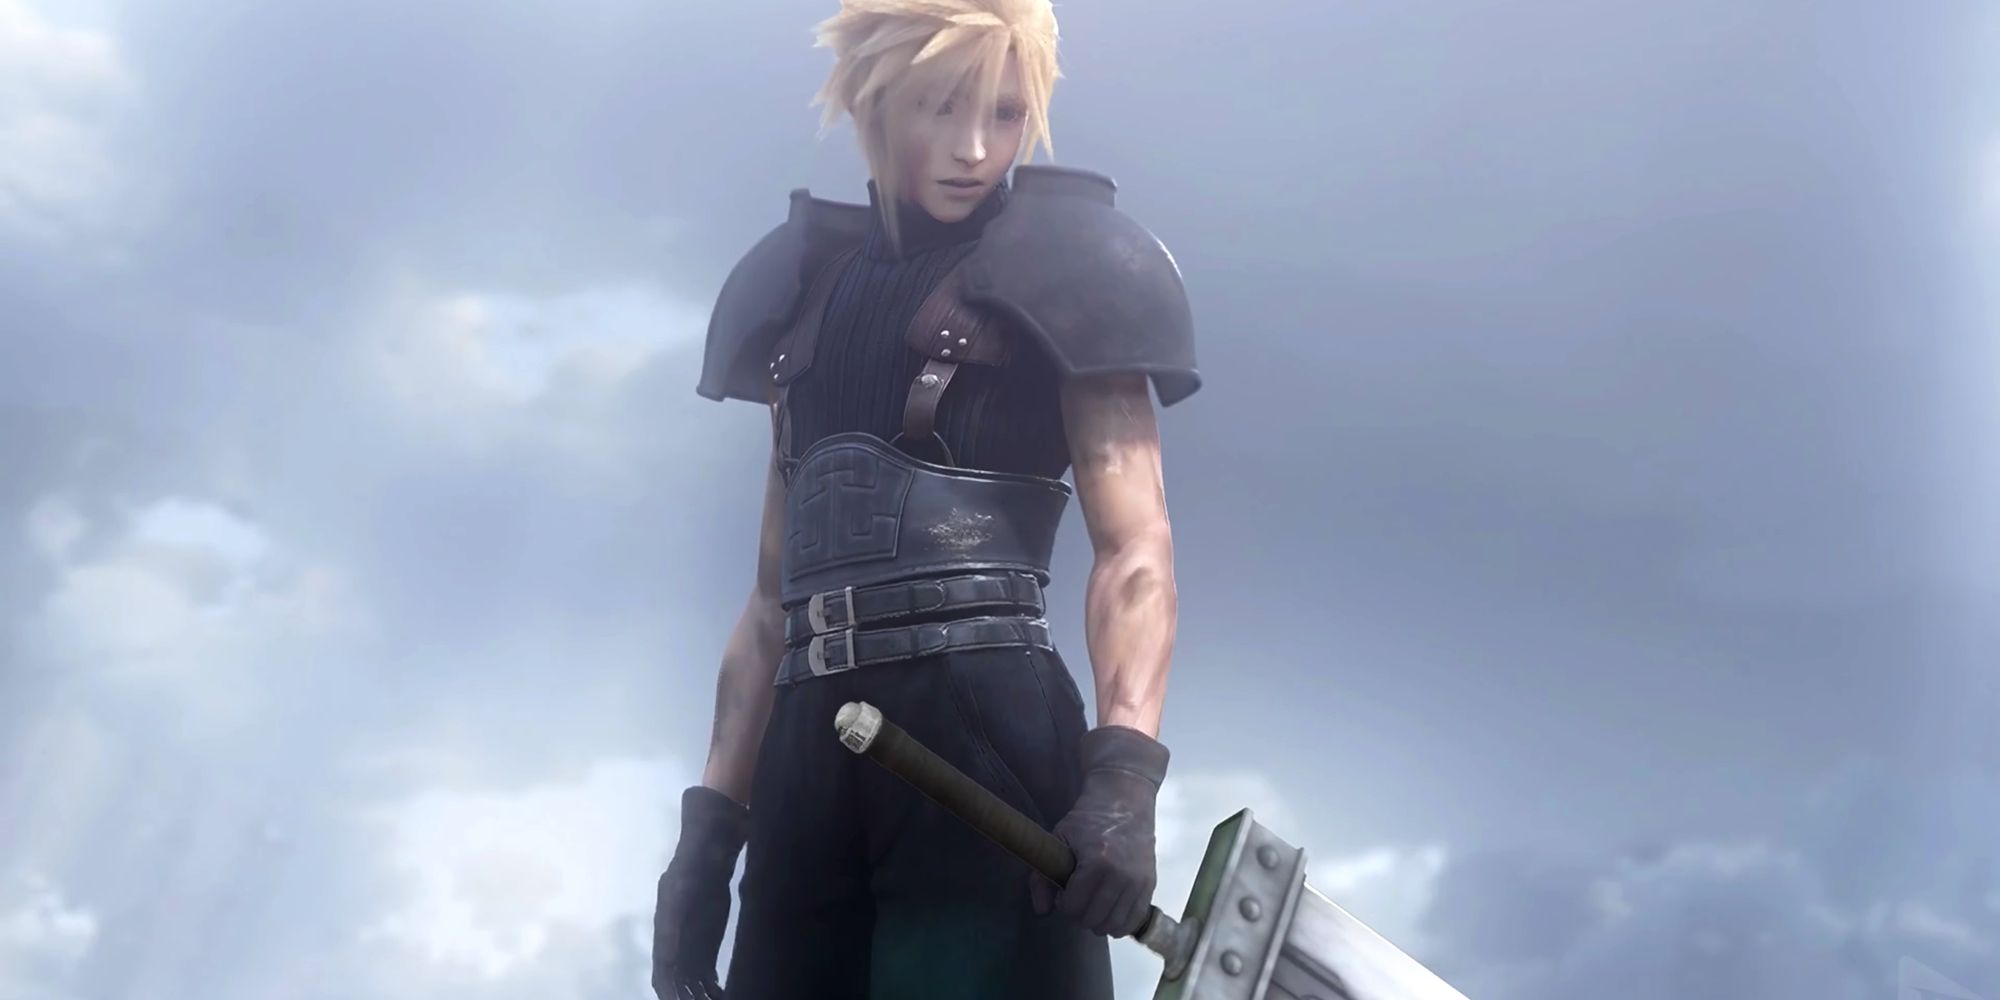 Cloud Strife standing and holding the Buster Sword at the end of Crisis Core: Final Fantasy 7 Reunion.